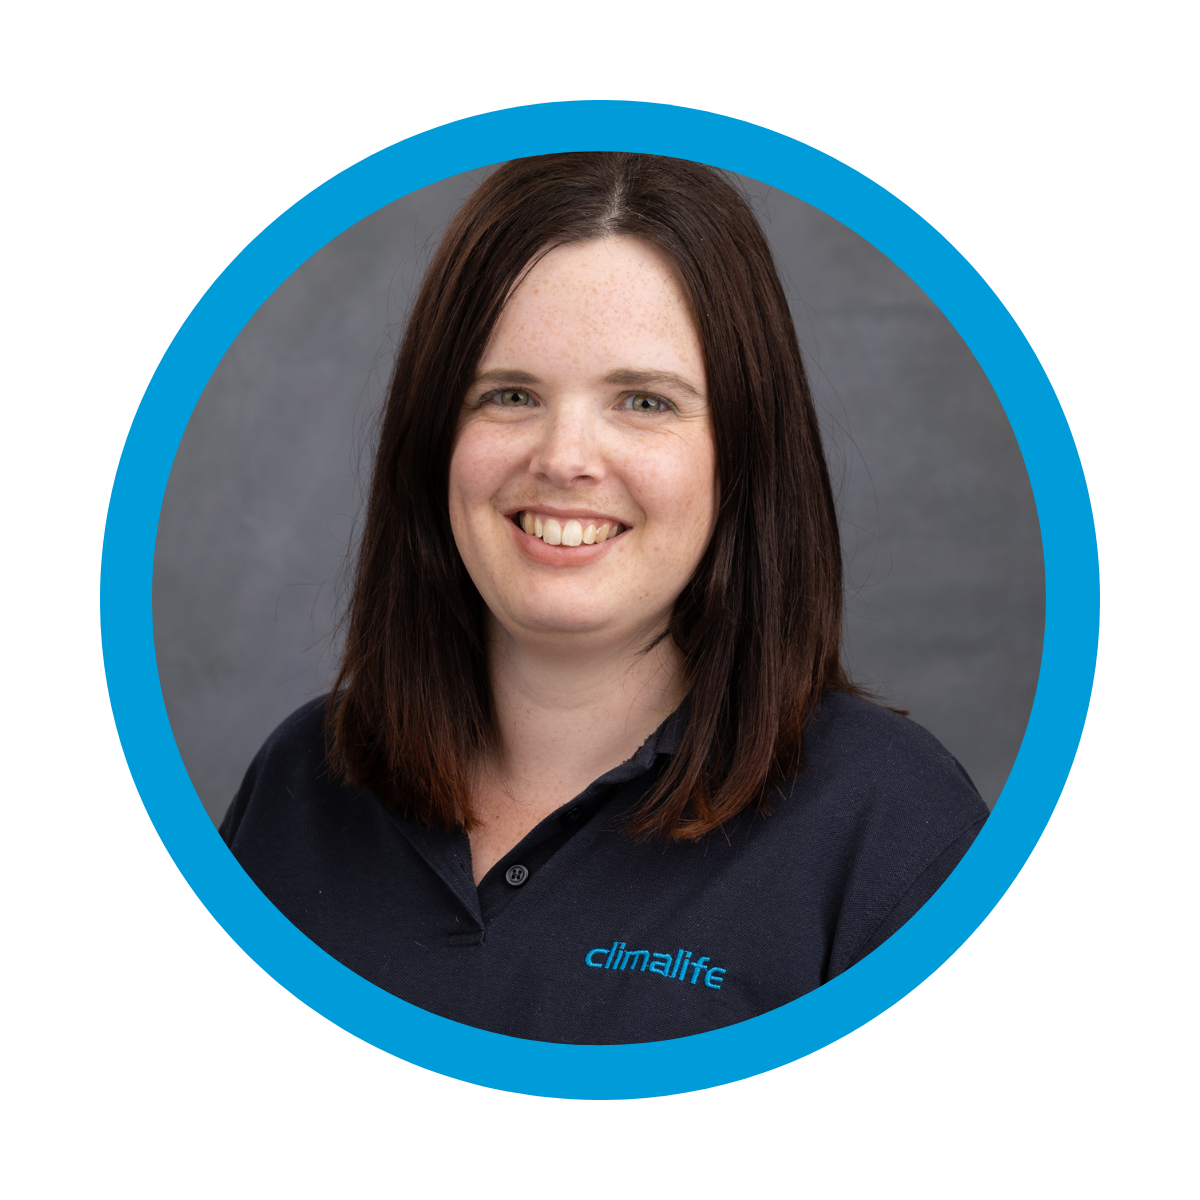 Laura McKeown Business Support Manager at Climalife